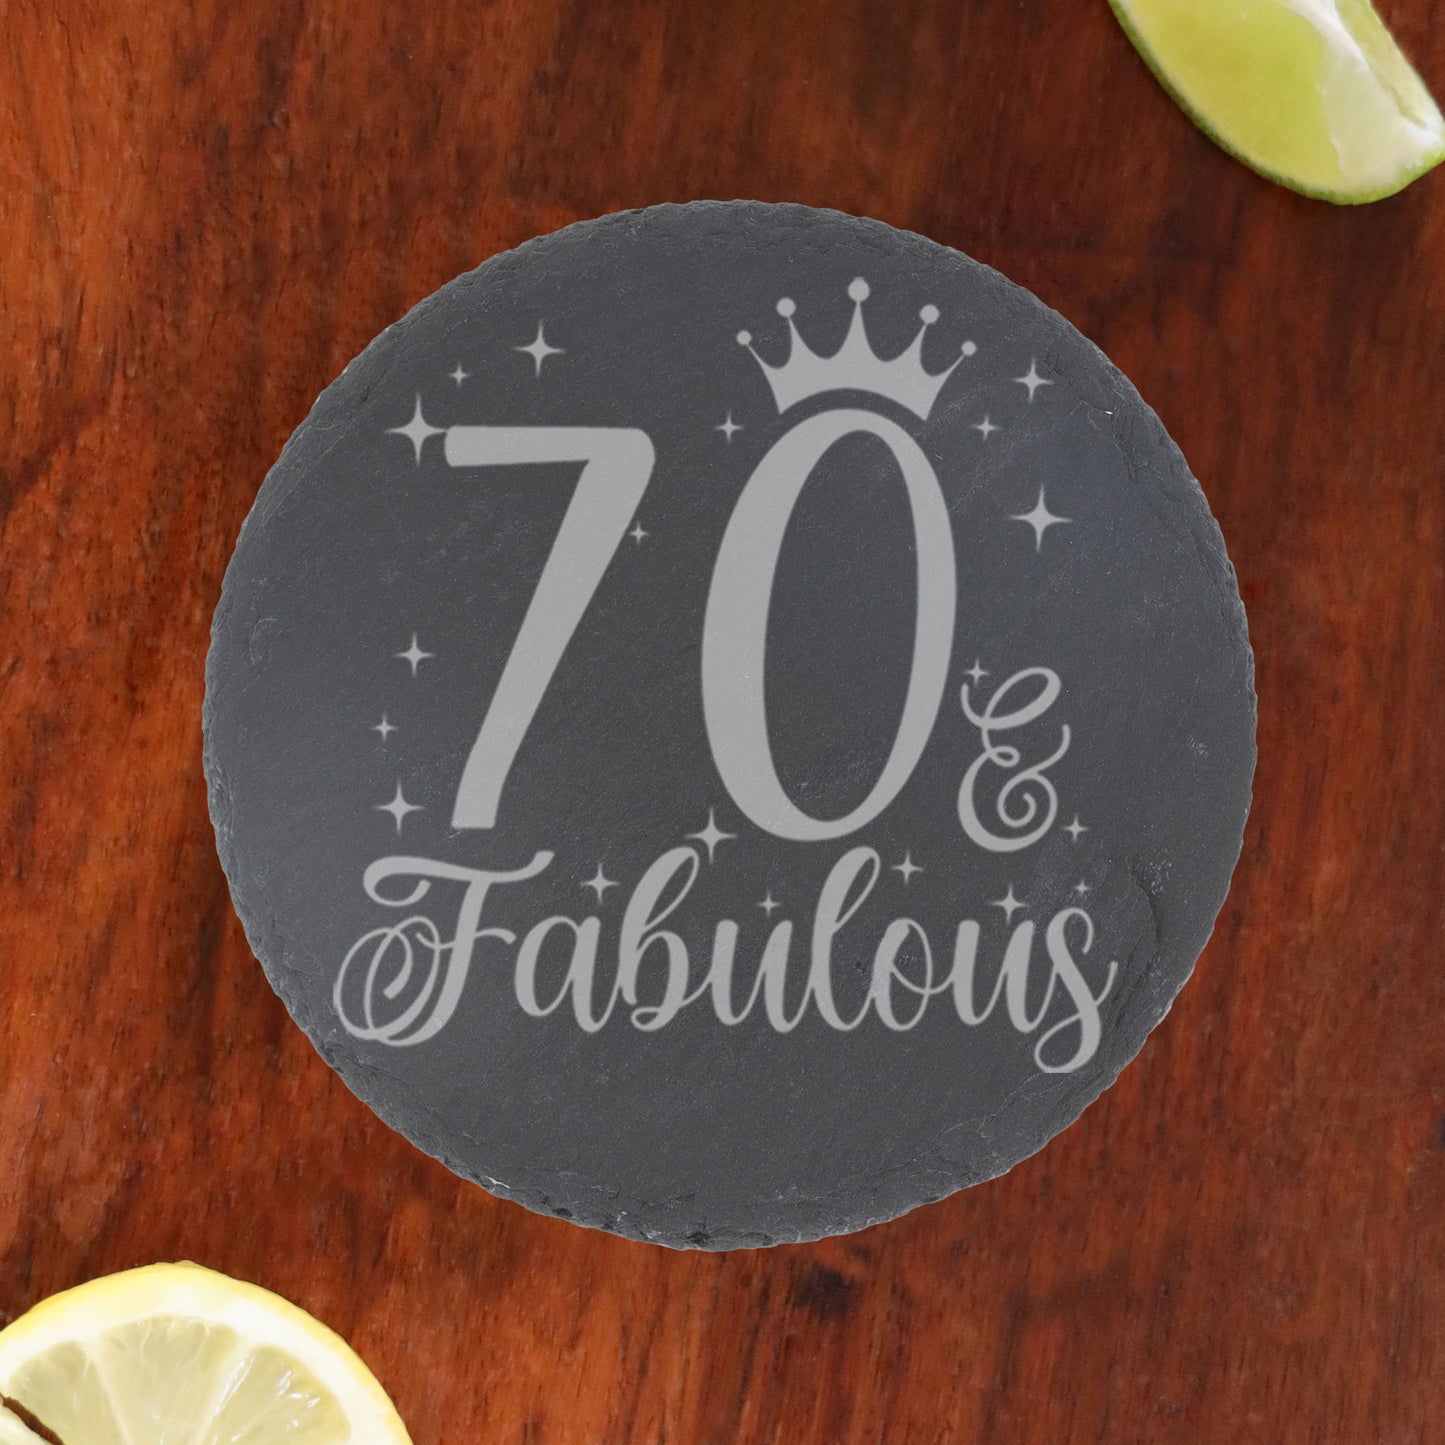 70 & Fabulous 70th Birthday Gift Engraved Wine Glass and/or Coaster Set  - Always Looking Good - Round Coaster Only  